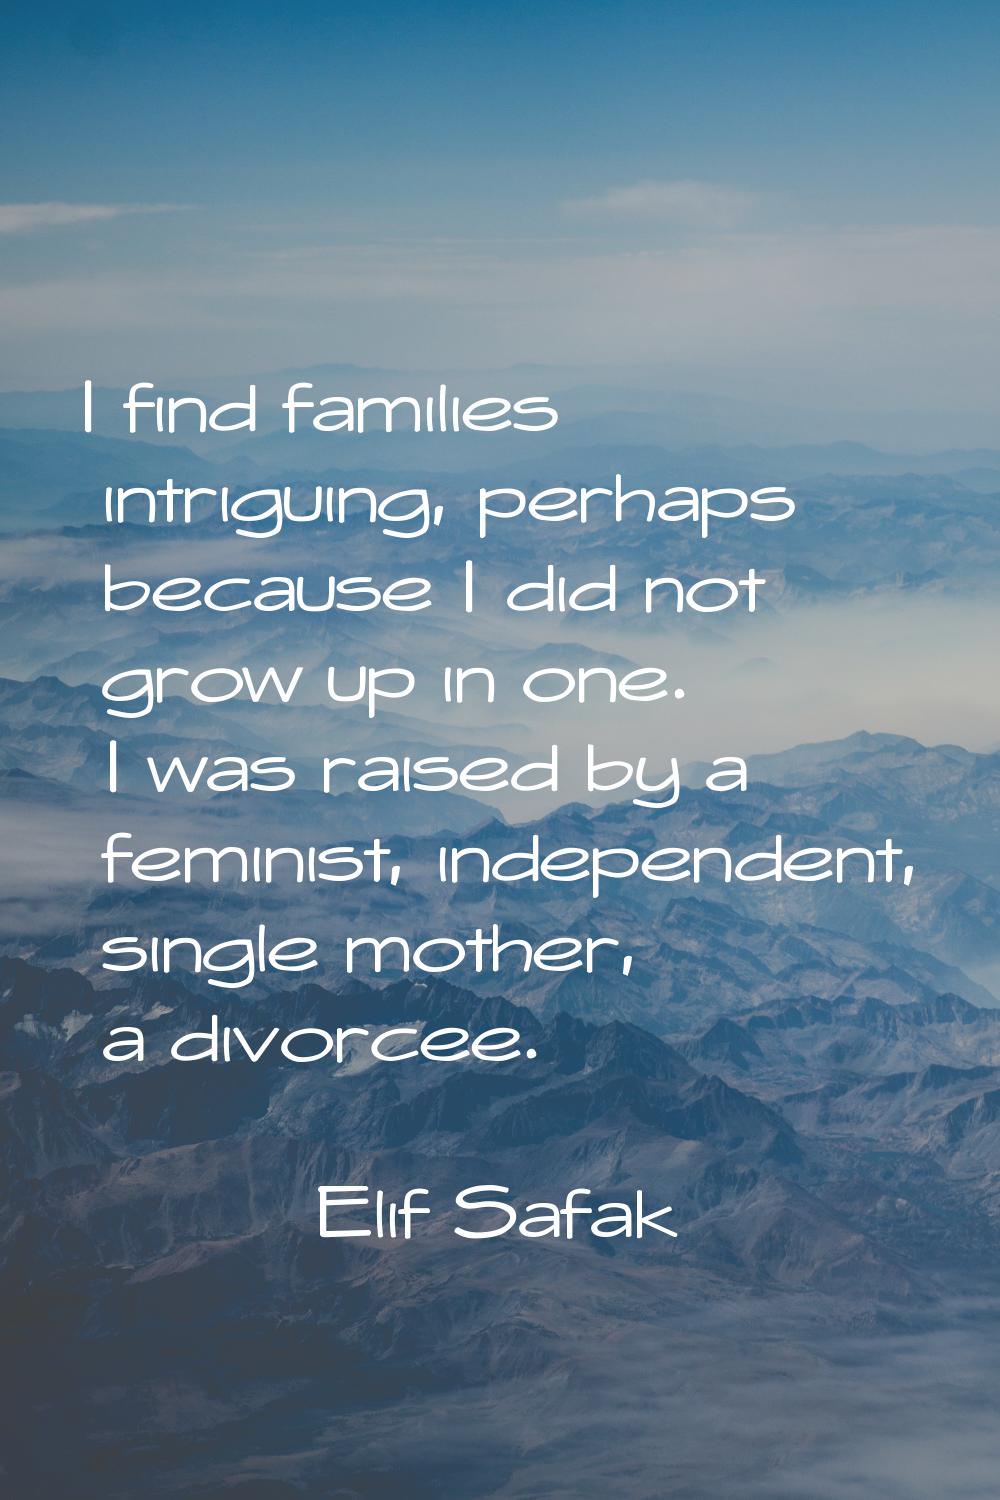 I find families intriguing, perhaps because I did not grow up in one. I was raised by a feminist, i